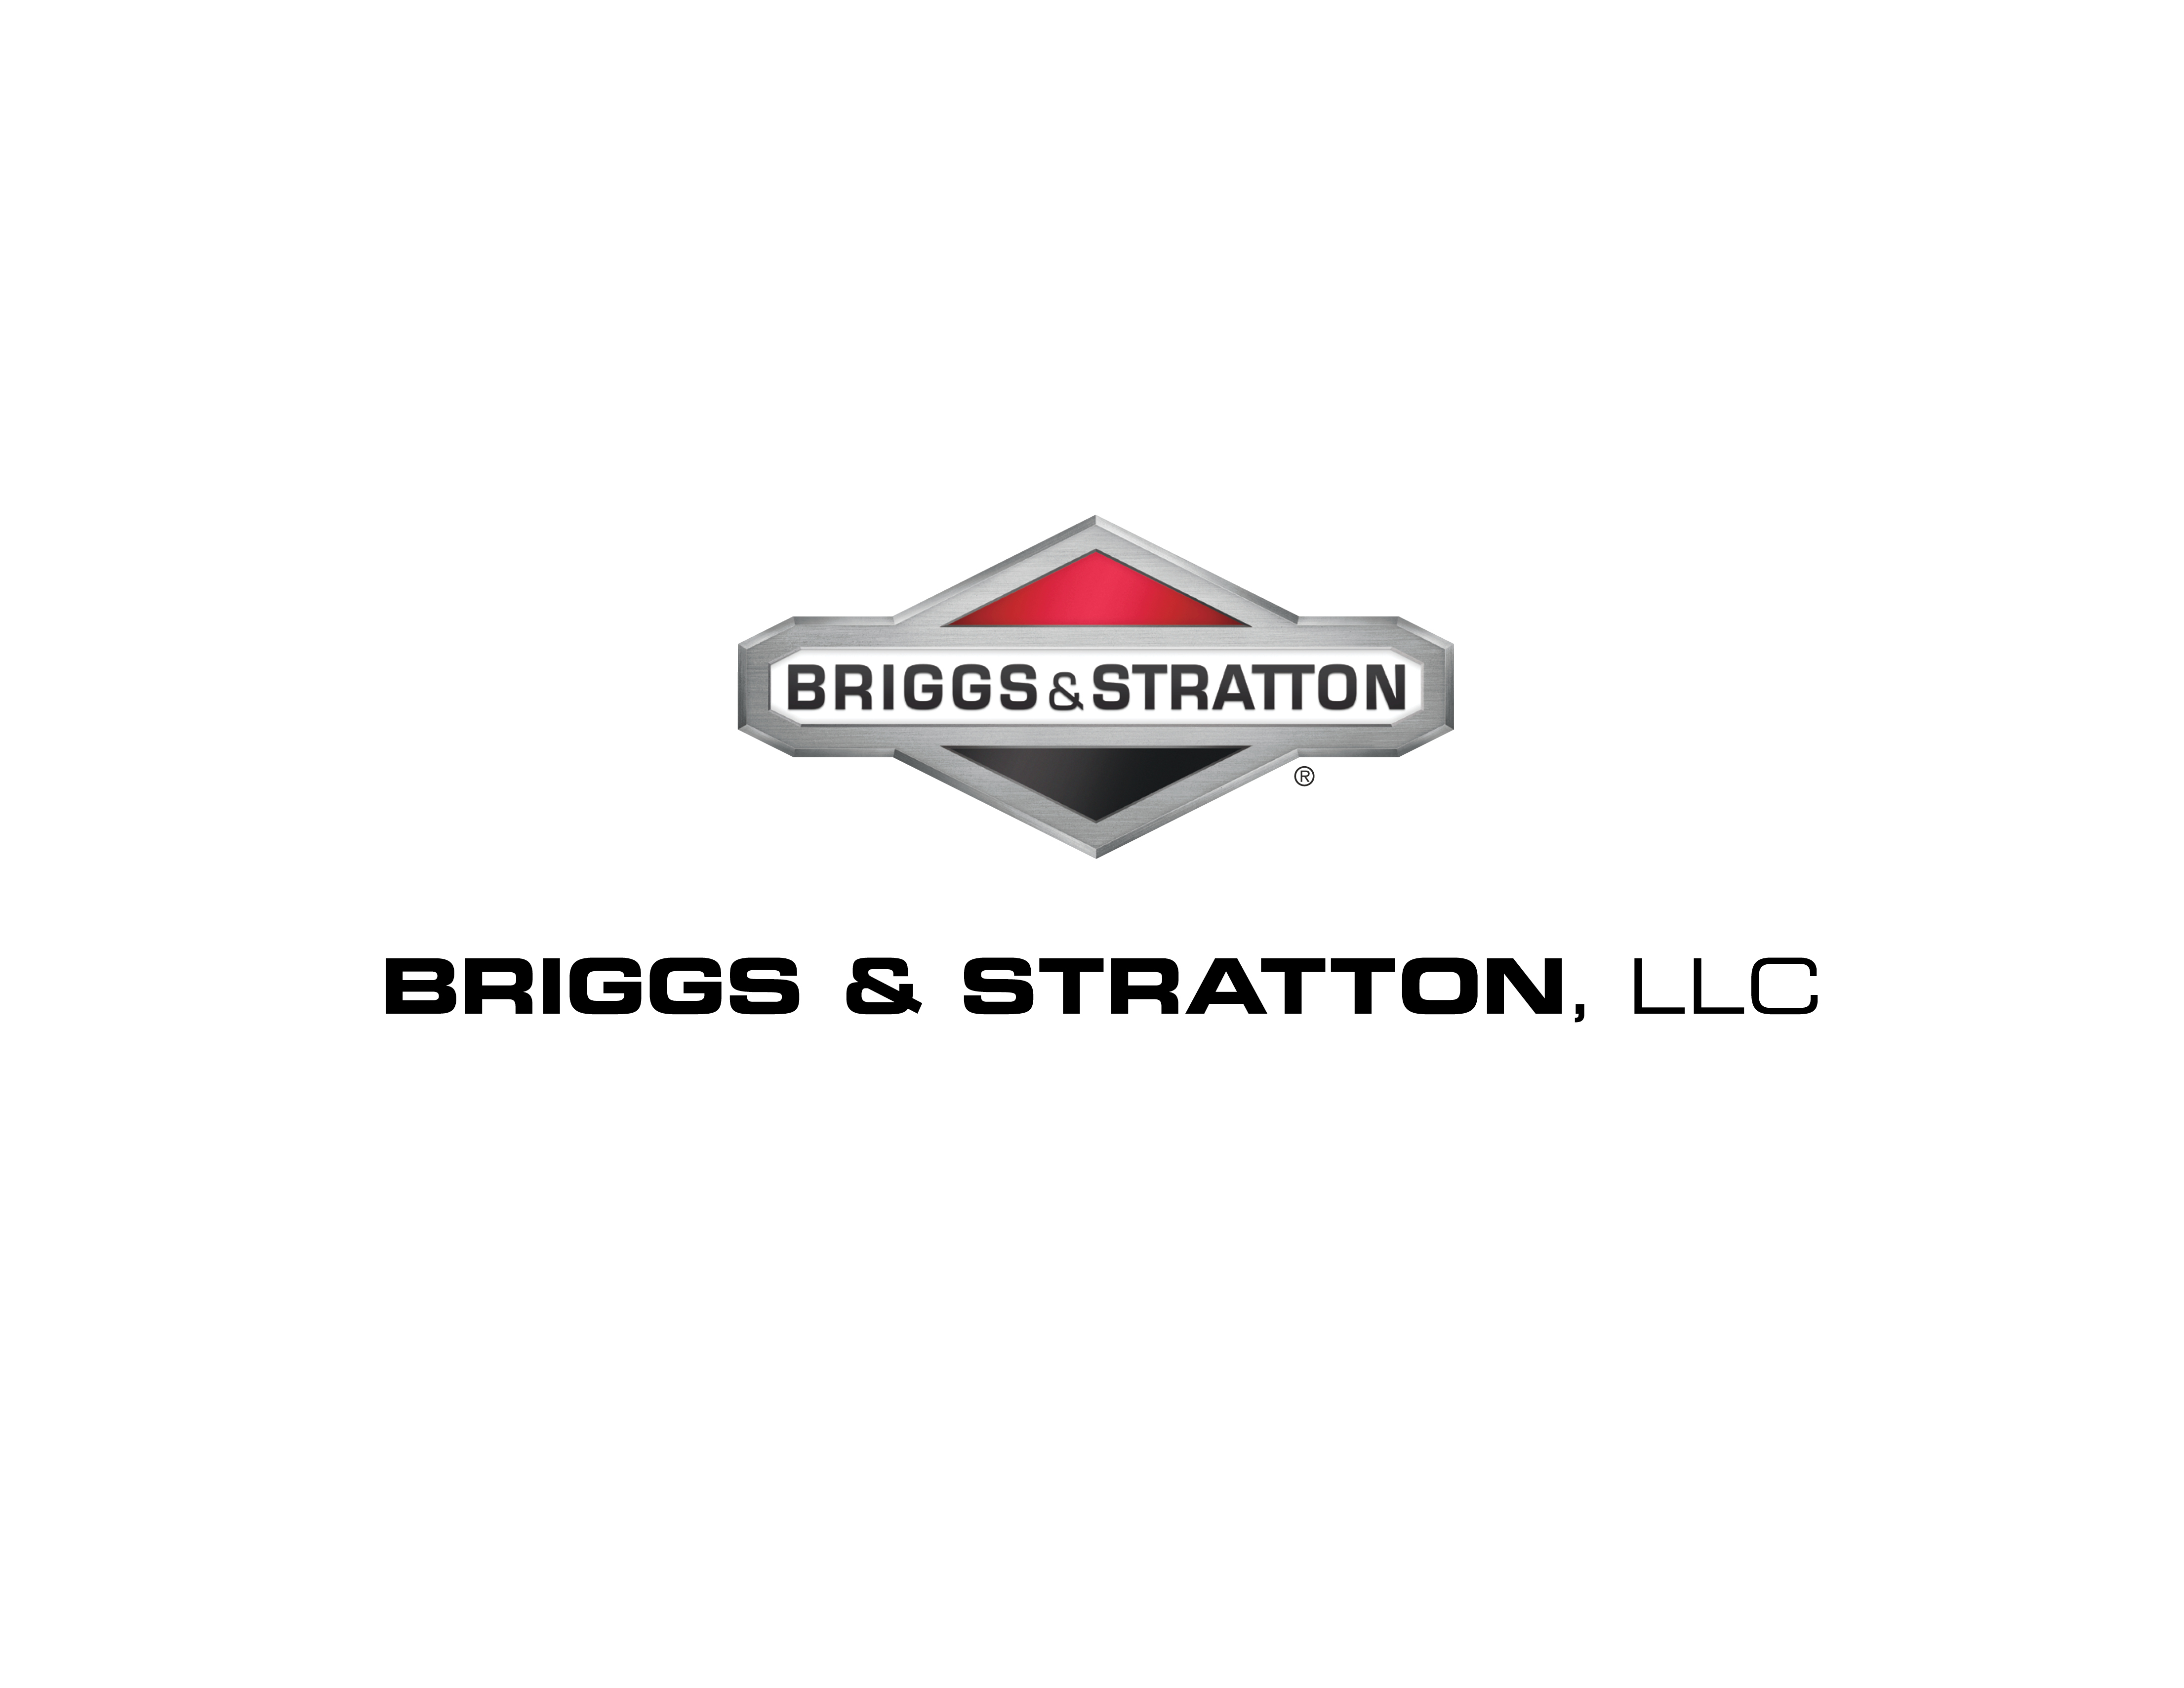 Briggs & Stratton Acquires Equity In Accelerated Systems Inc.